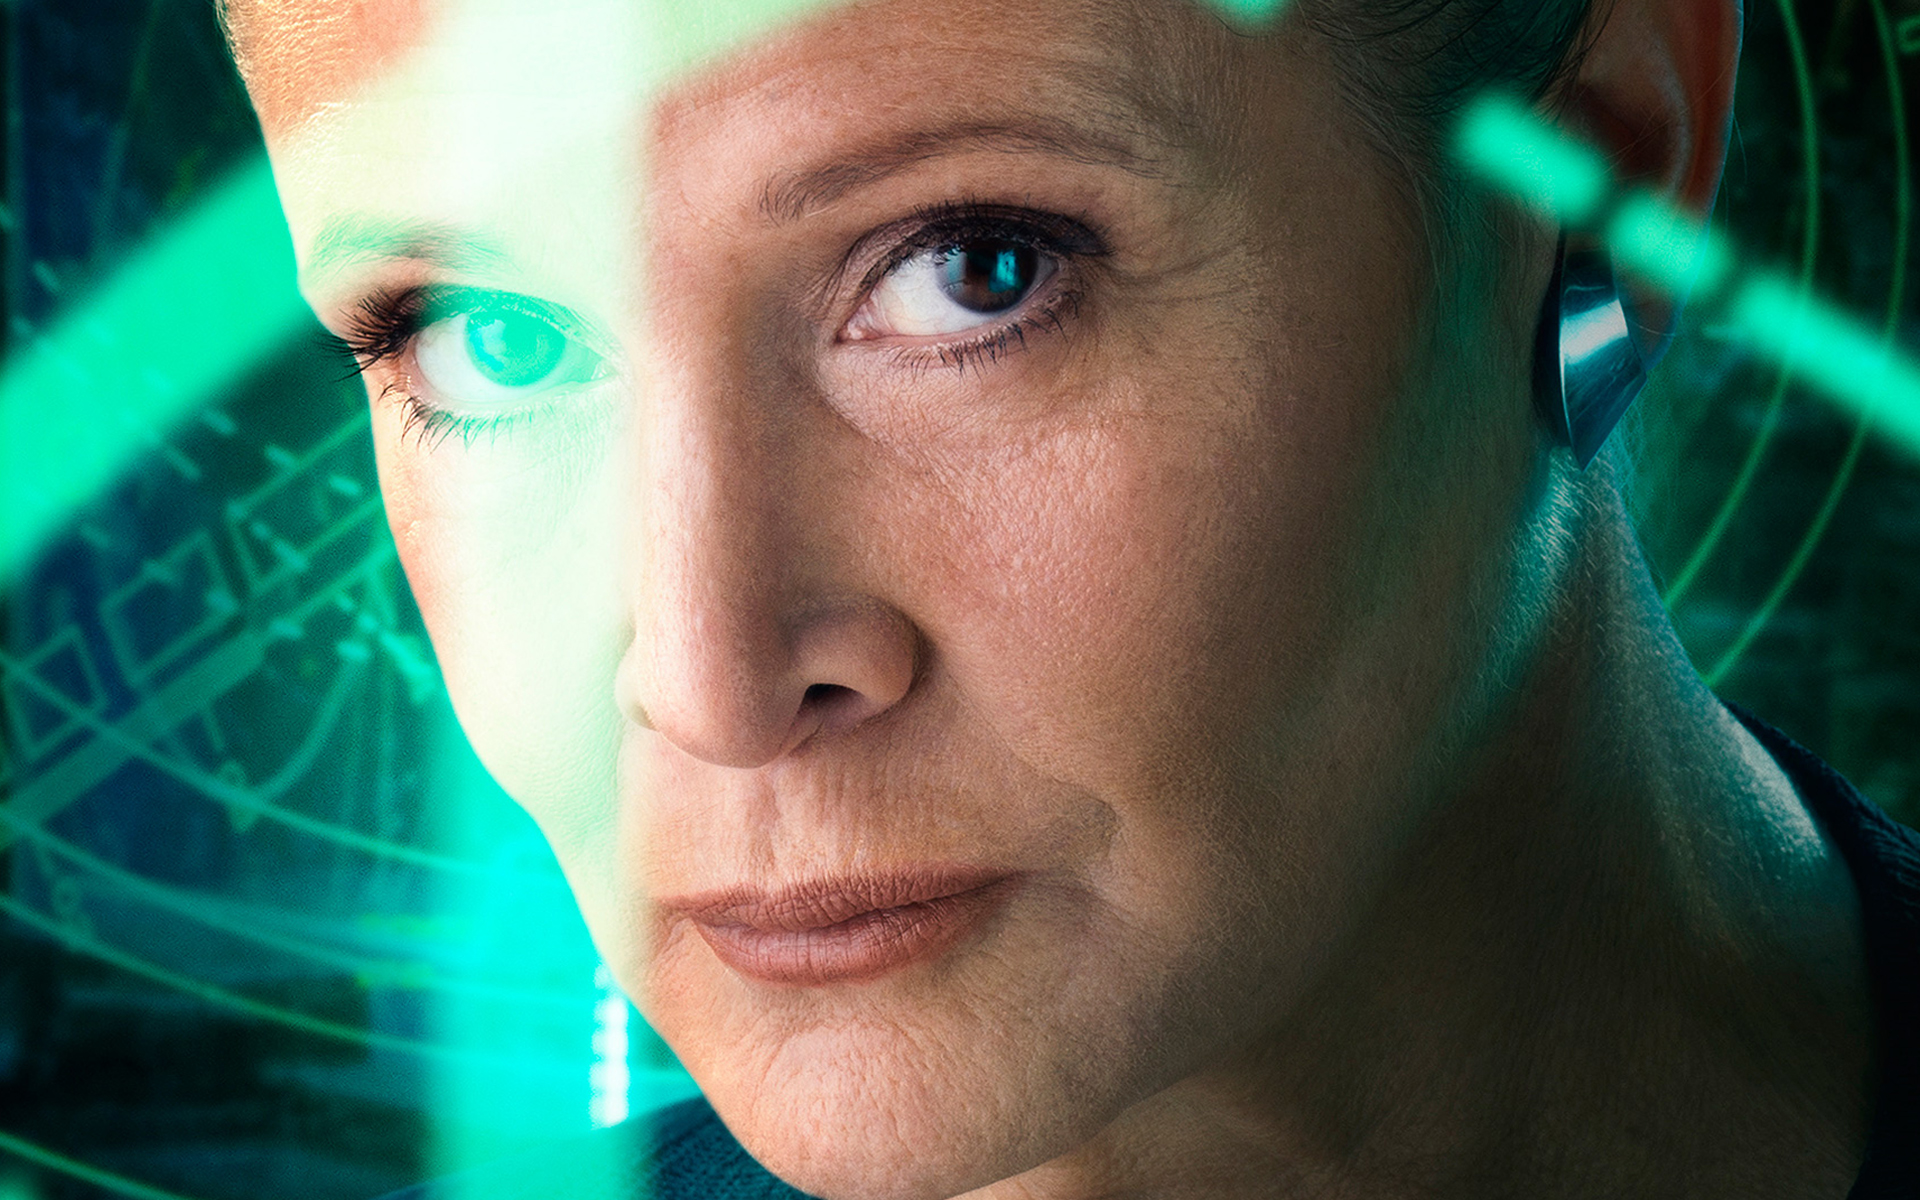 Star Wars Episode Vii The Force Awakens Princess Leia Carrie Fisher Star Wars 1920x1200